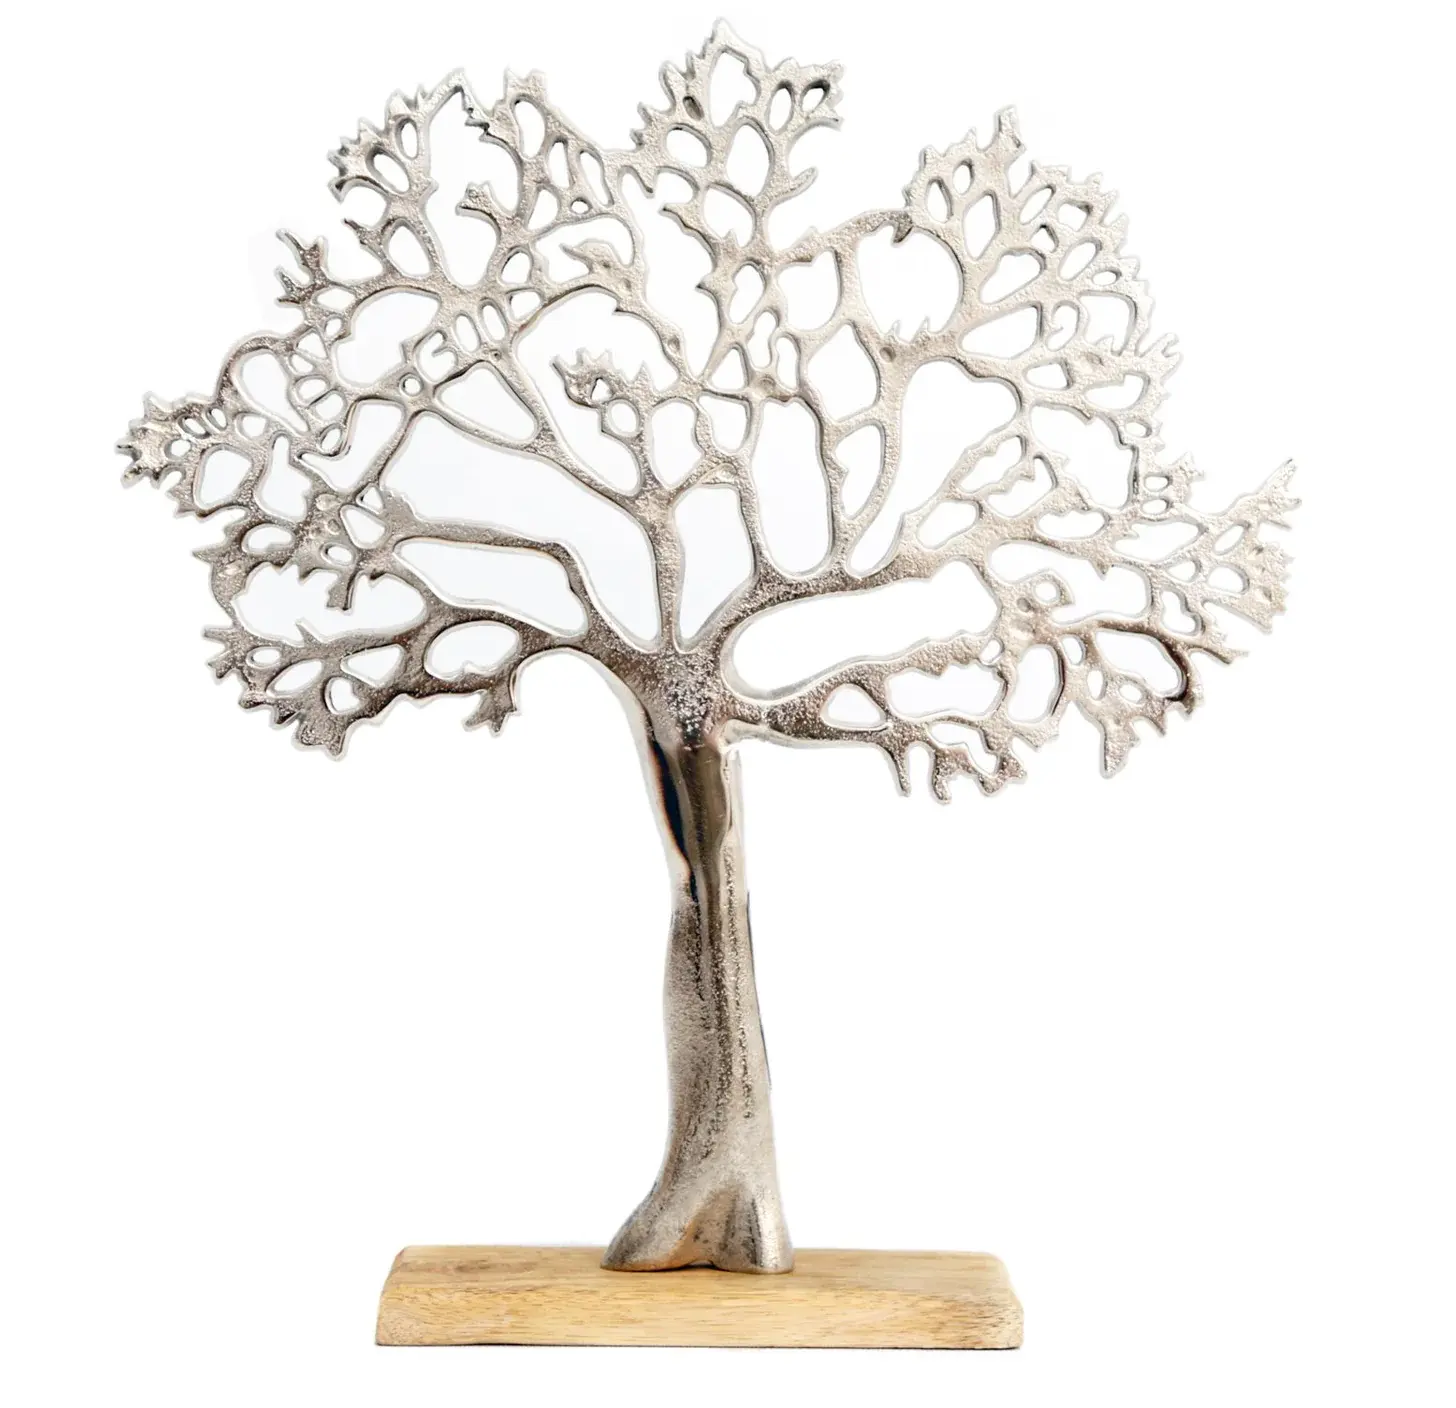 Home and Gifts Silver Metal Tree Decorative Ornament On Wooden Base Aluminium Tree Sculpture Handmade Silver